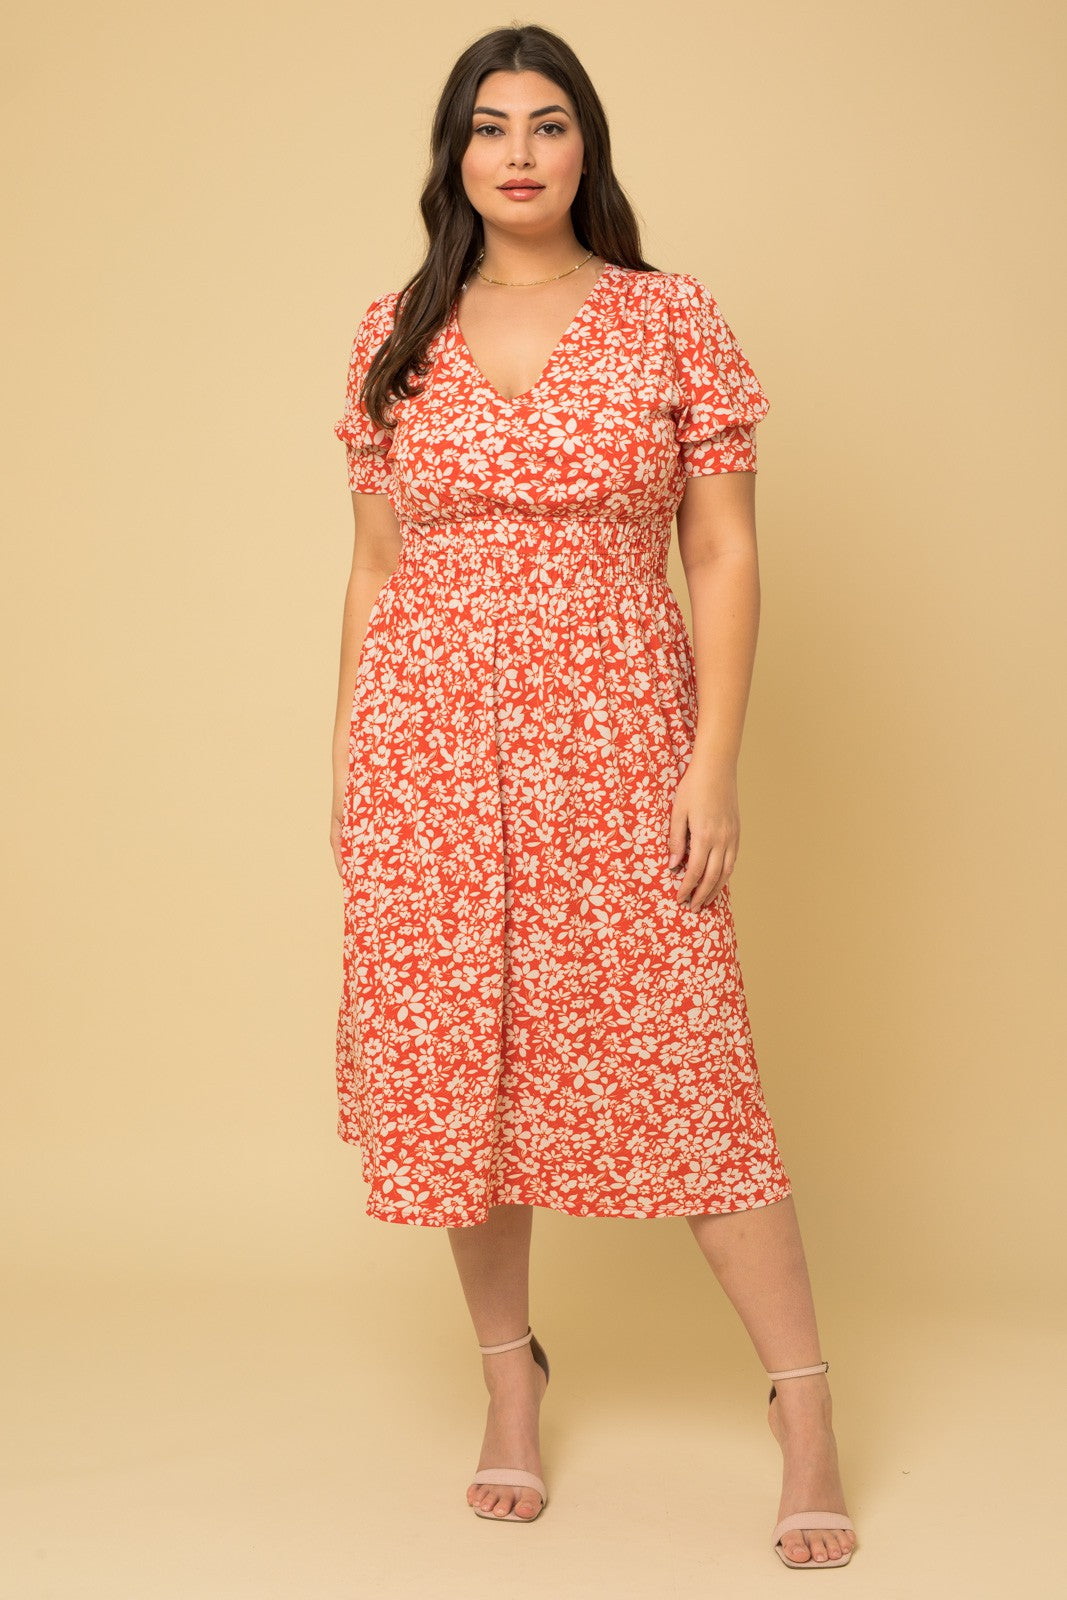 Red with White Floral Short Puff Sleeve V-Neck Midi Dress (Plus Size Exclusive!)